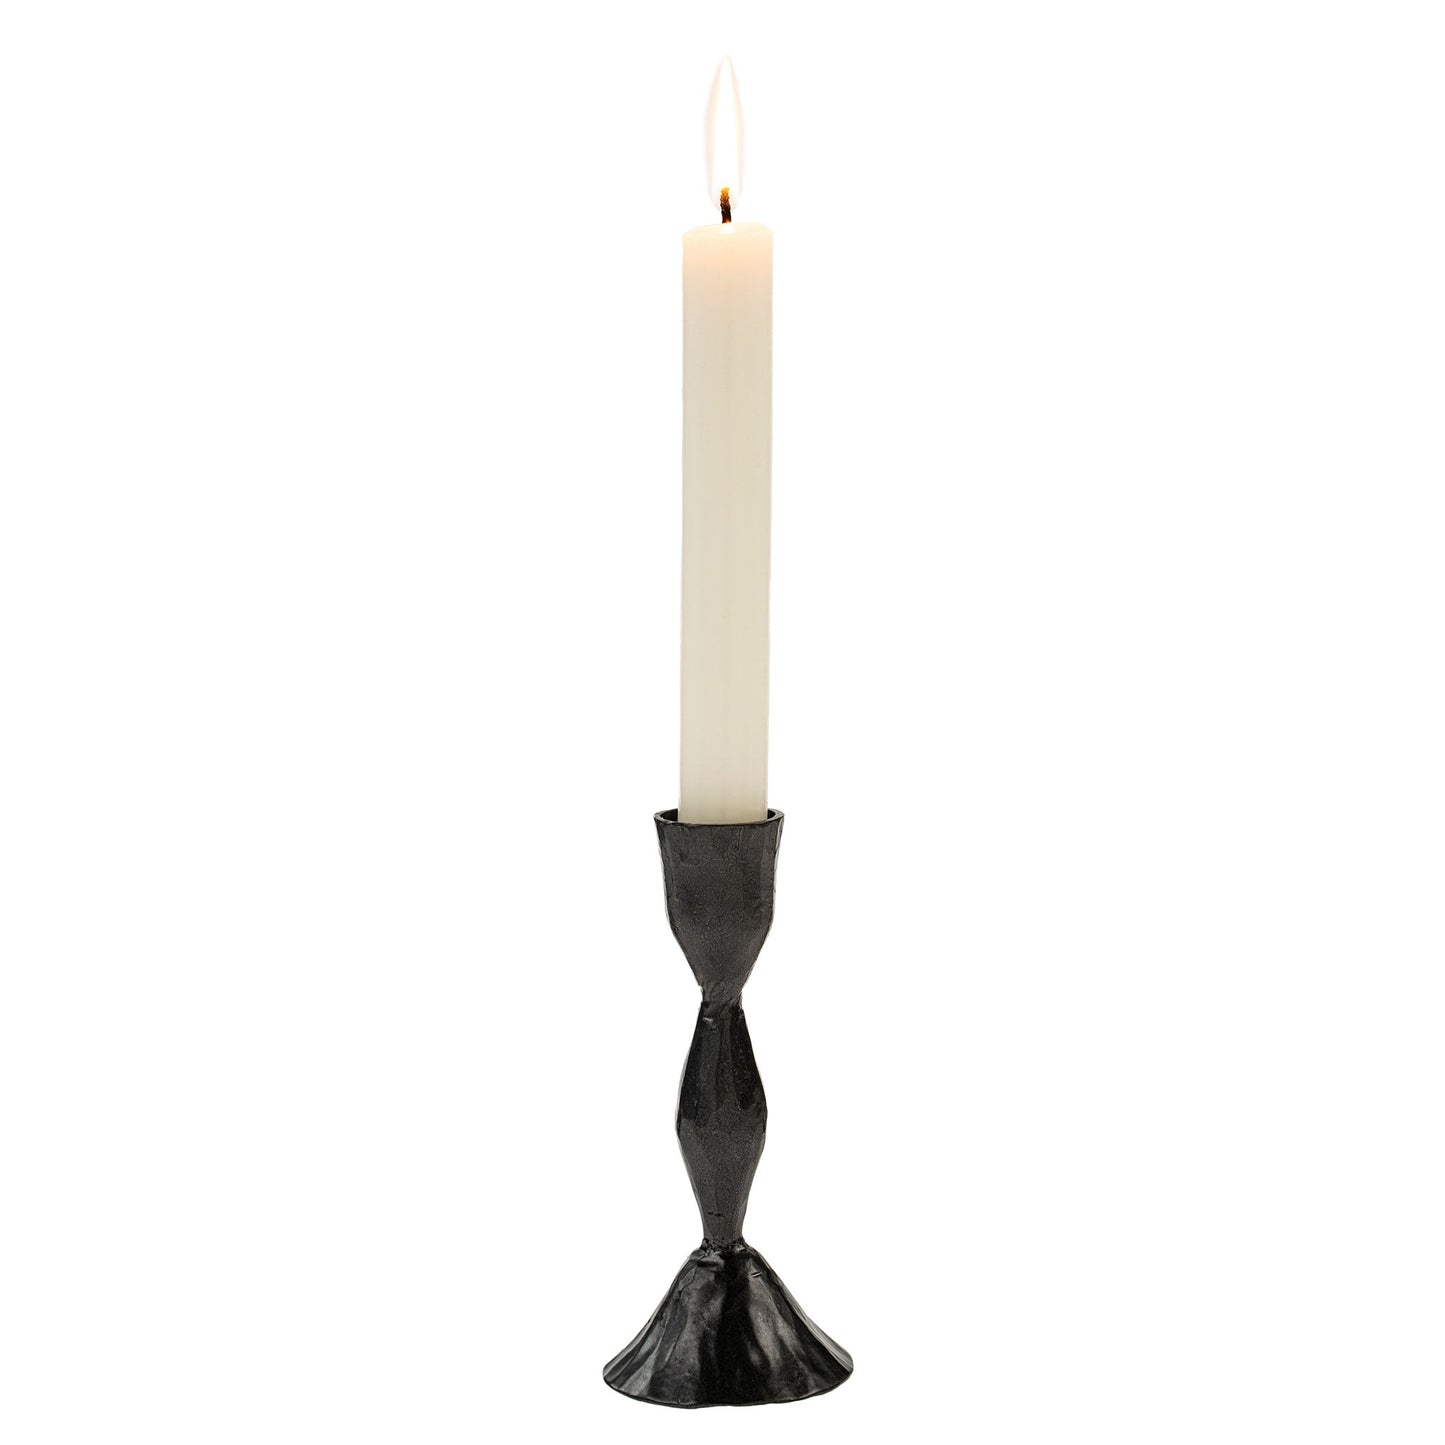 Honeycomb Shaped Candle Holder - High Quality Ceramic from Apollo Box